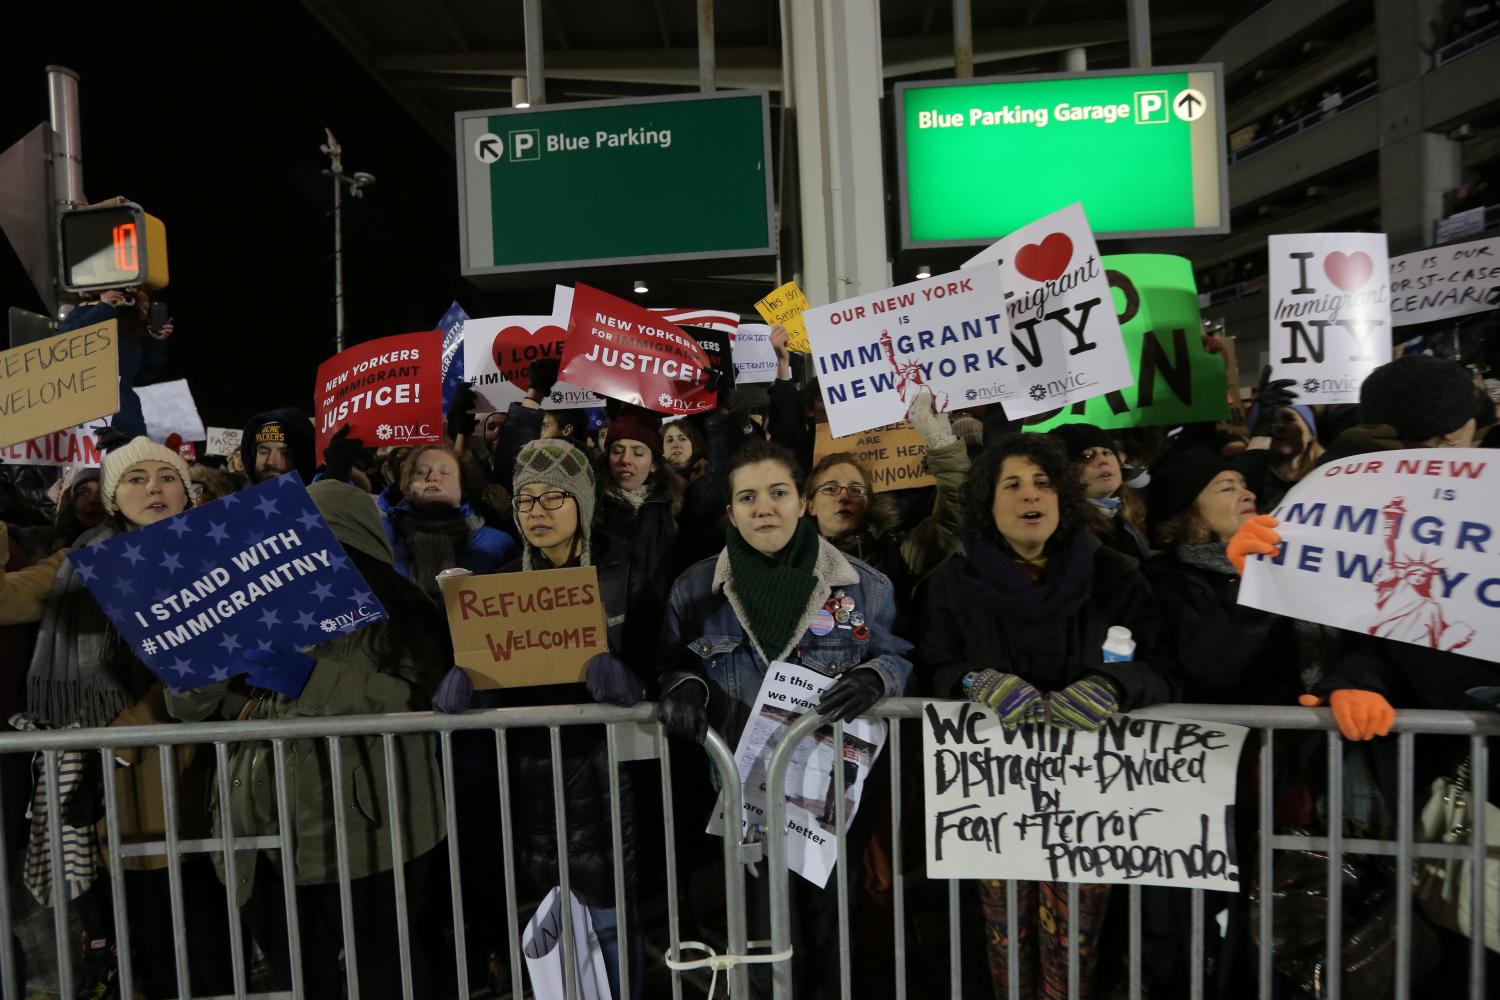 QUALITY REPEAT - Protesters gather outside Terminal 4 at JFK airport in opposition to U.S. president Donald Trump's proposed ban on immigration in Queens, New York City, U.S., January 28, 2017. REUTERS/Stephen Yang - RTSXULV